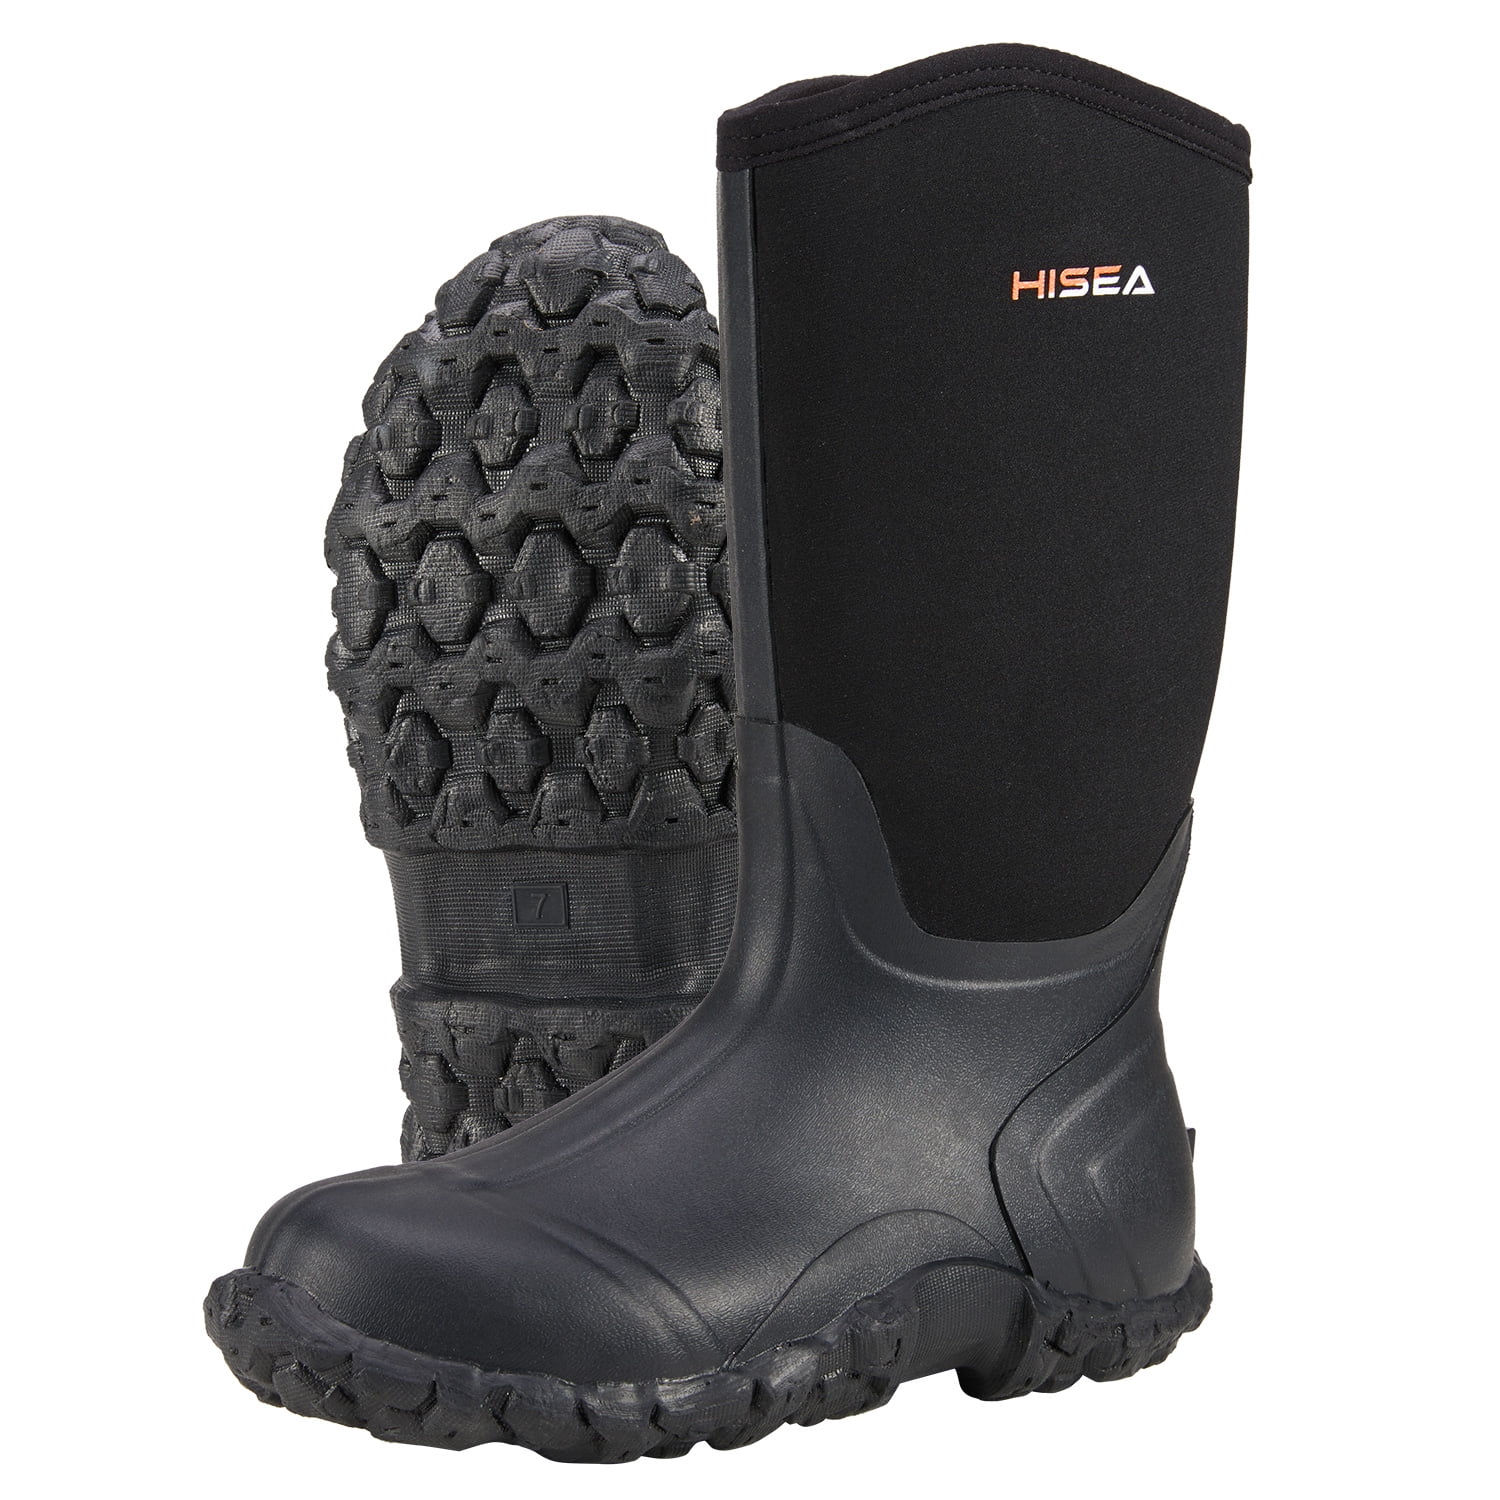 HISEA Women's BREATHABLE Rubber Boots Waterproof Snow & Rain Muck Hunting Boots